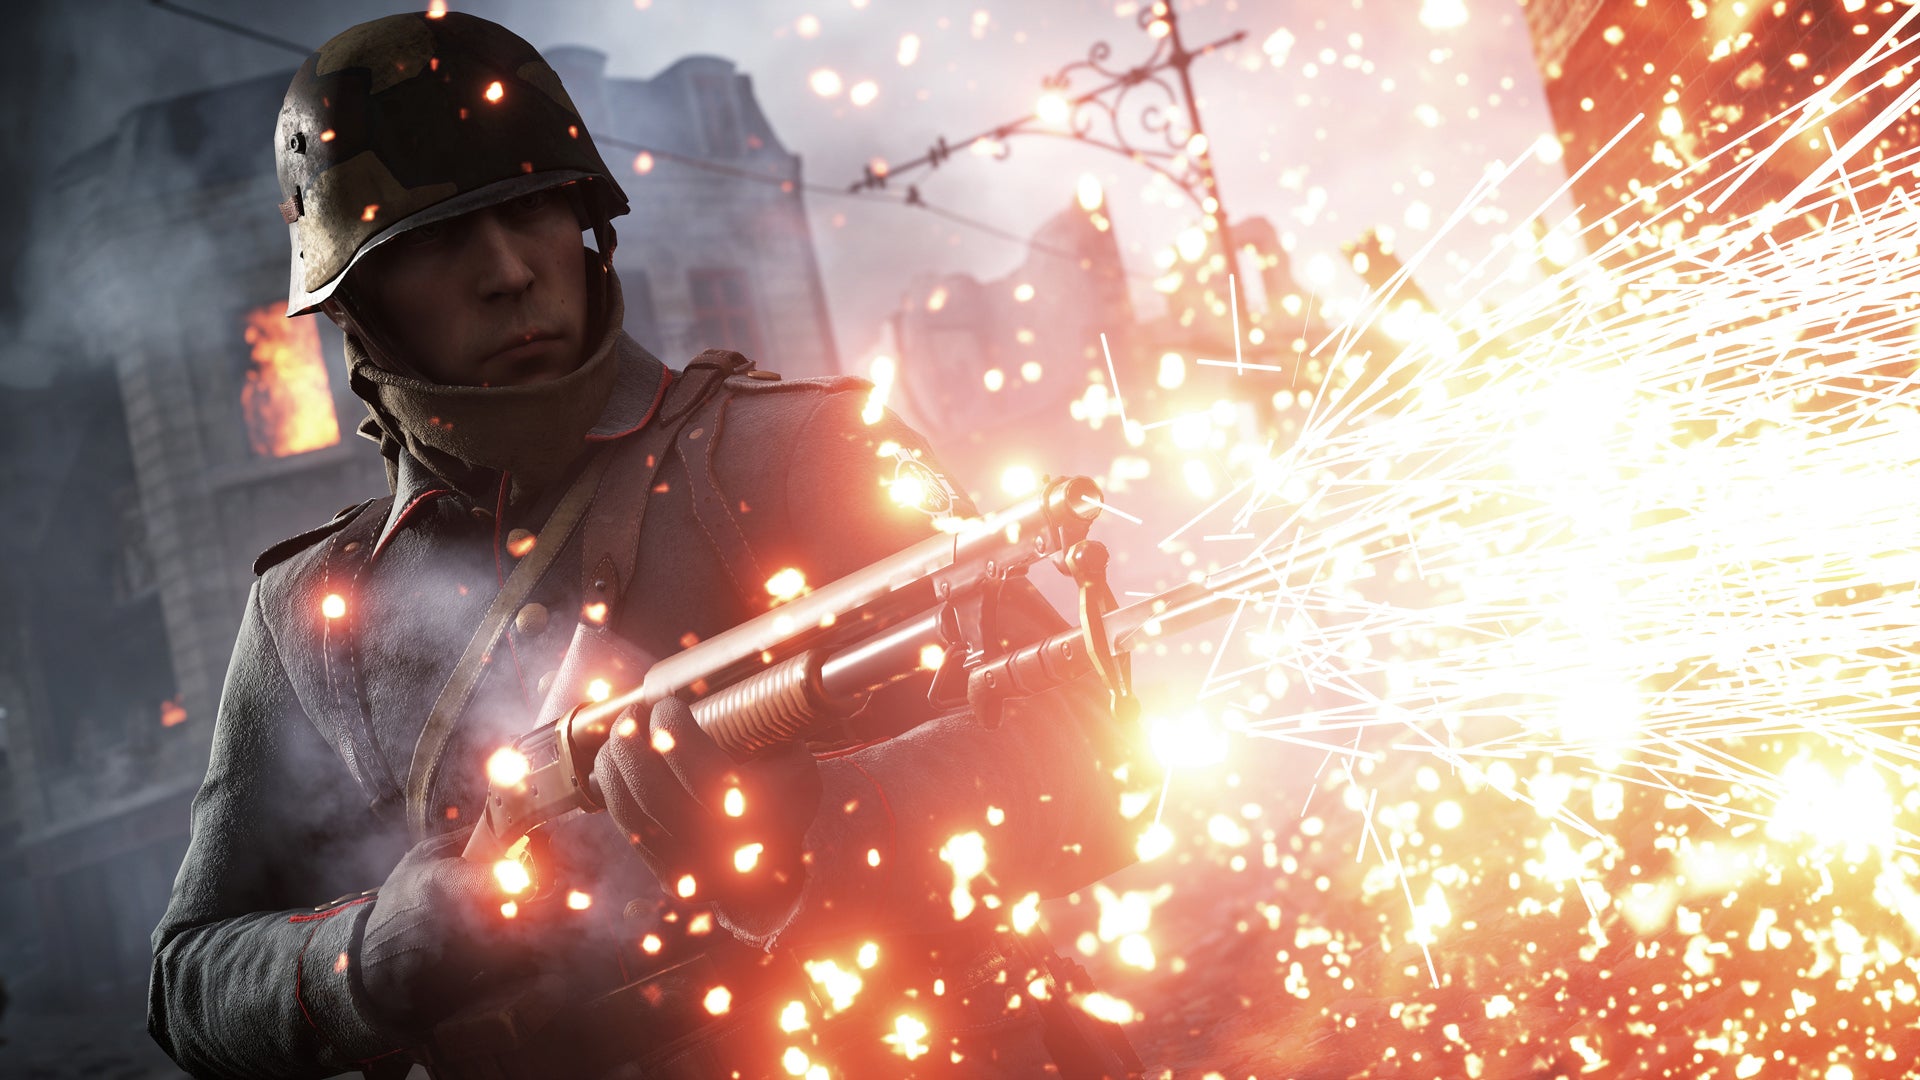 Image for Battlefield 1 Patch 1.05 Improves Performance